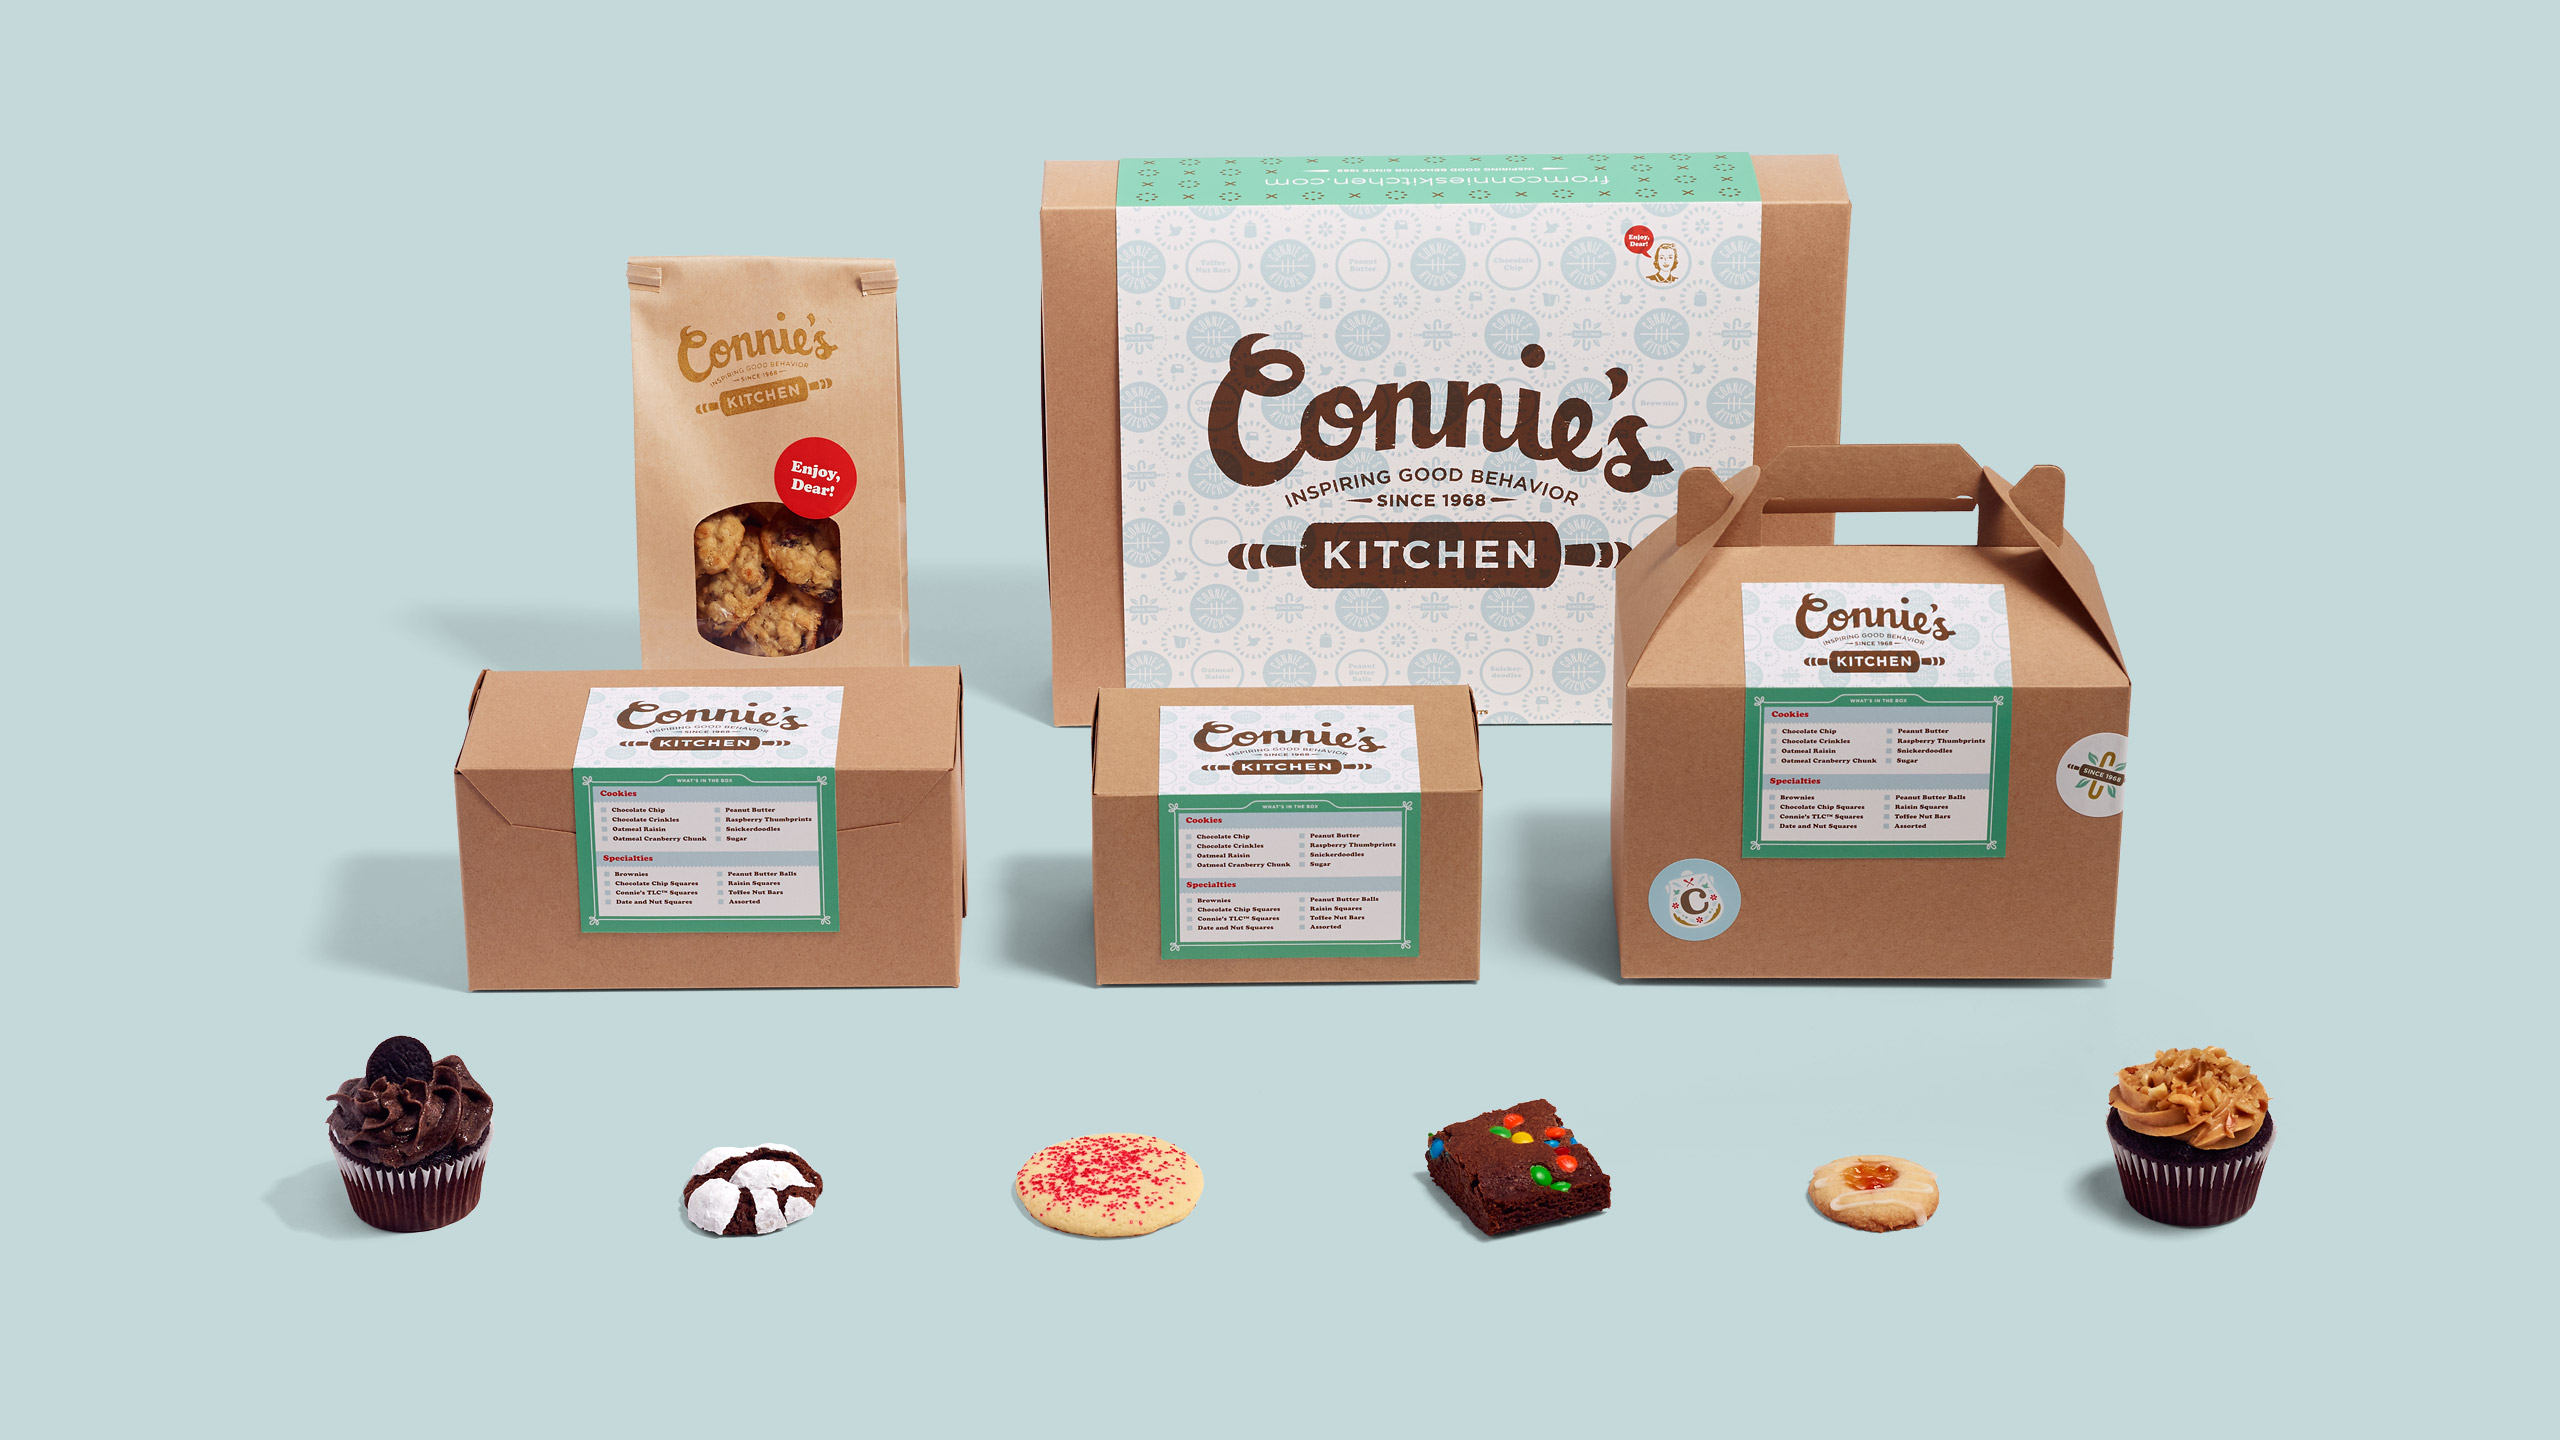 nelsoncouto-work-connieskitchen-packaging